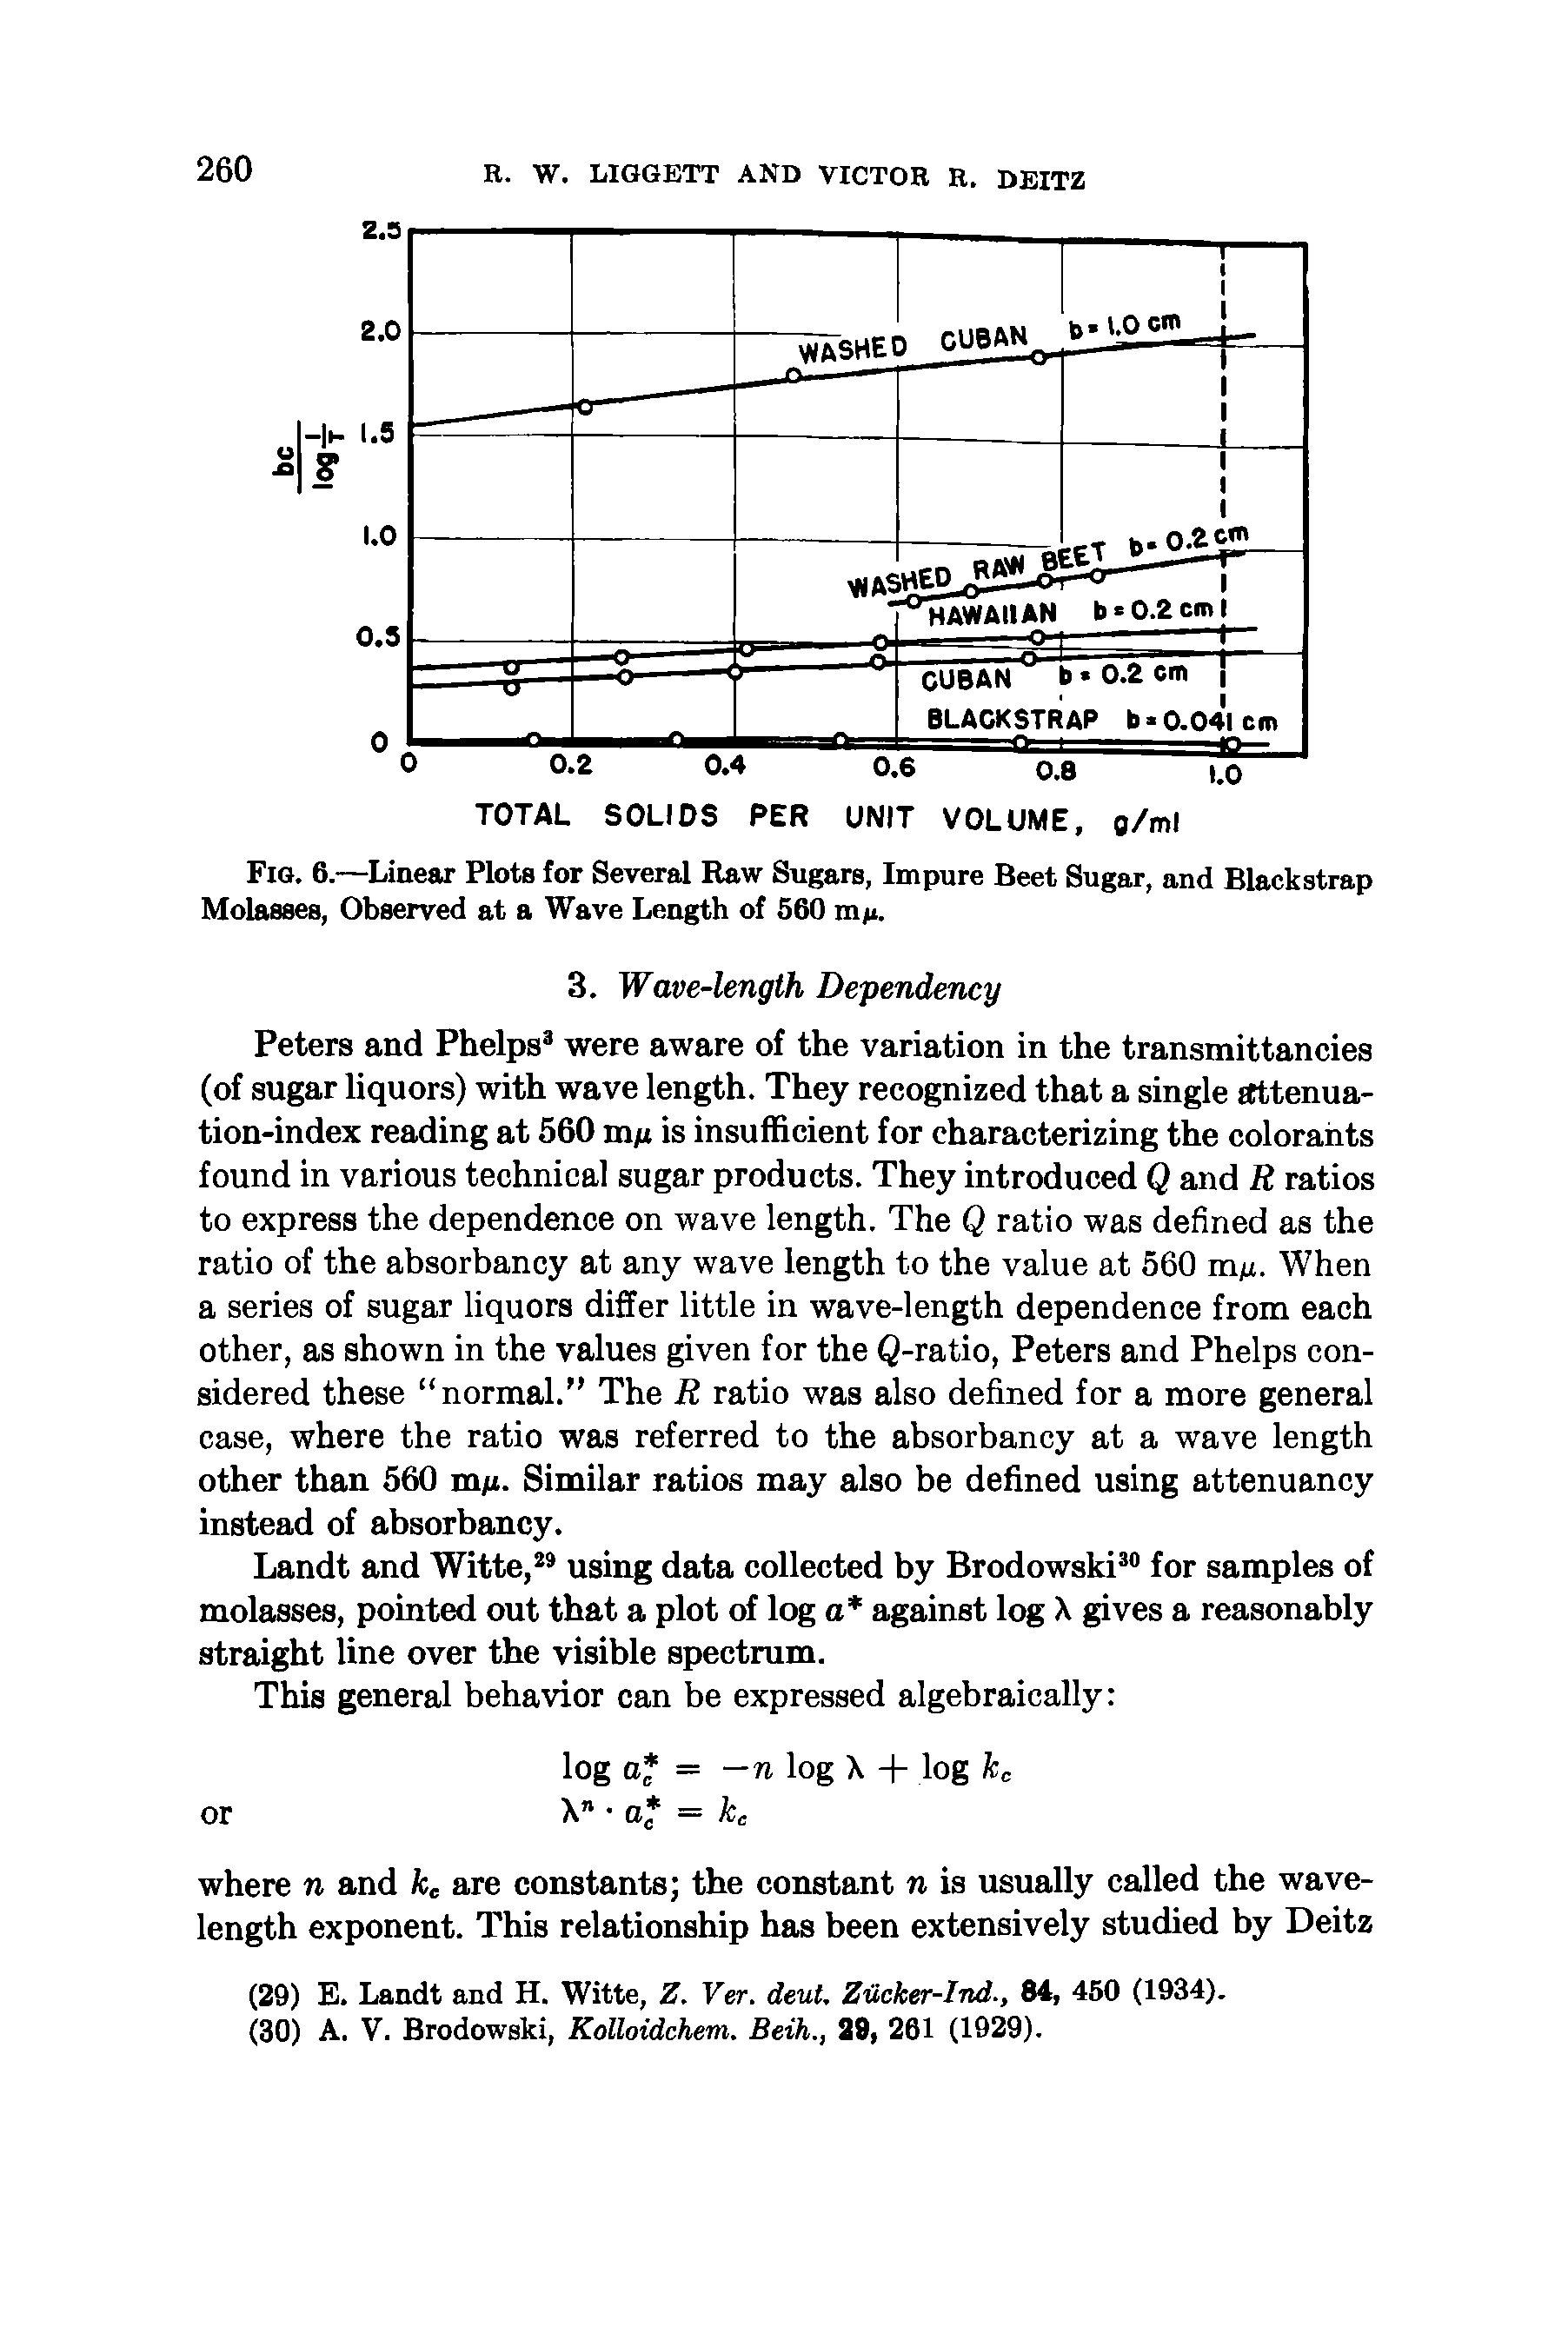 Fig. 6.—Linear Plots for Several Raw Sugars, Impure Beet Sugar, and Blackstrap Molasses, Observed at a Wave Length of 560 m/ .